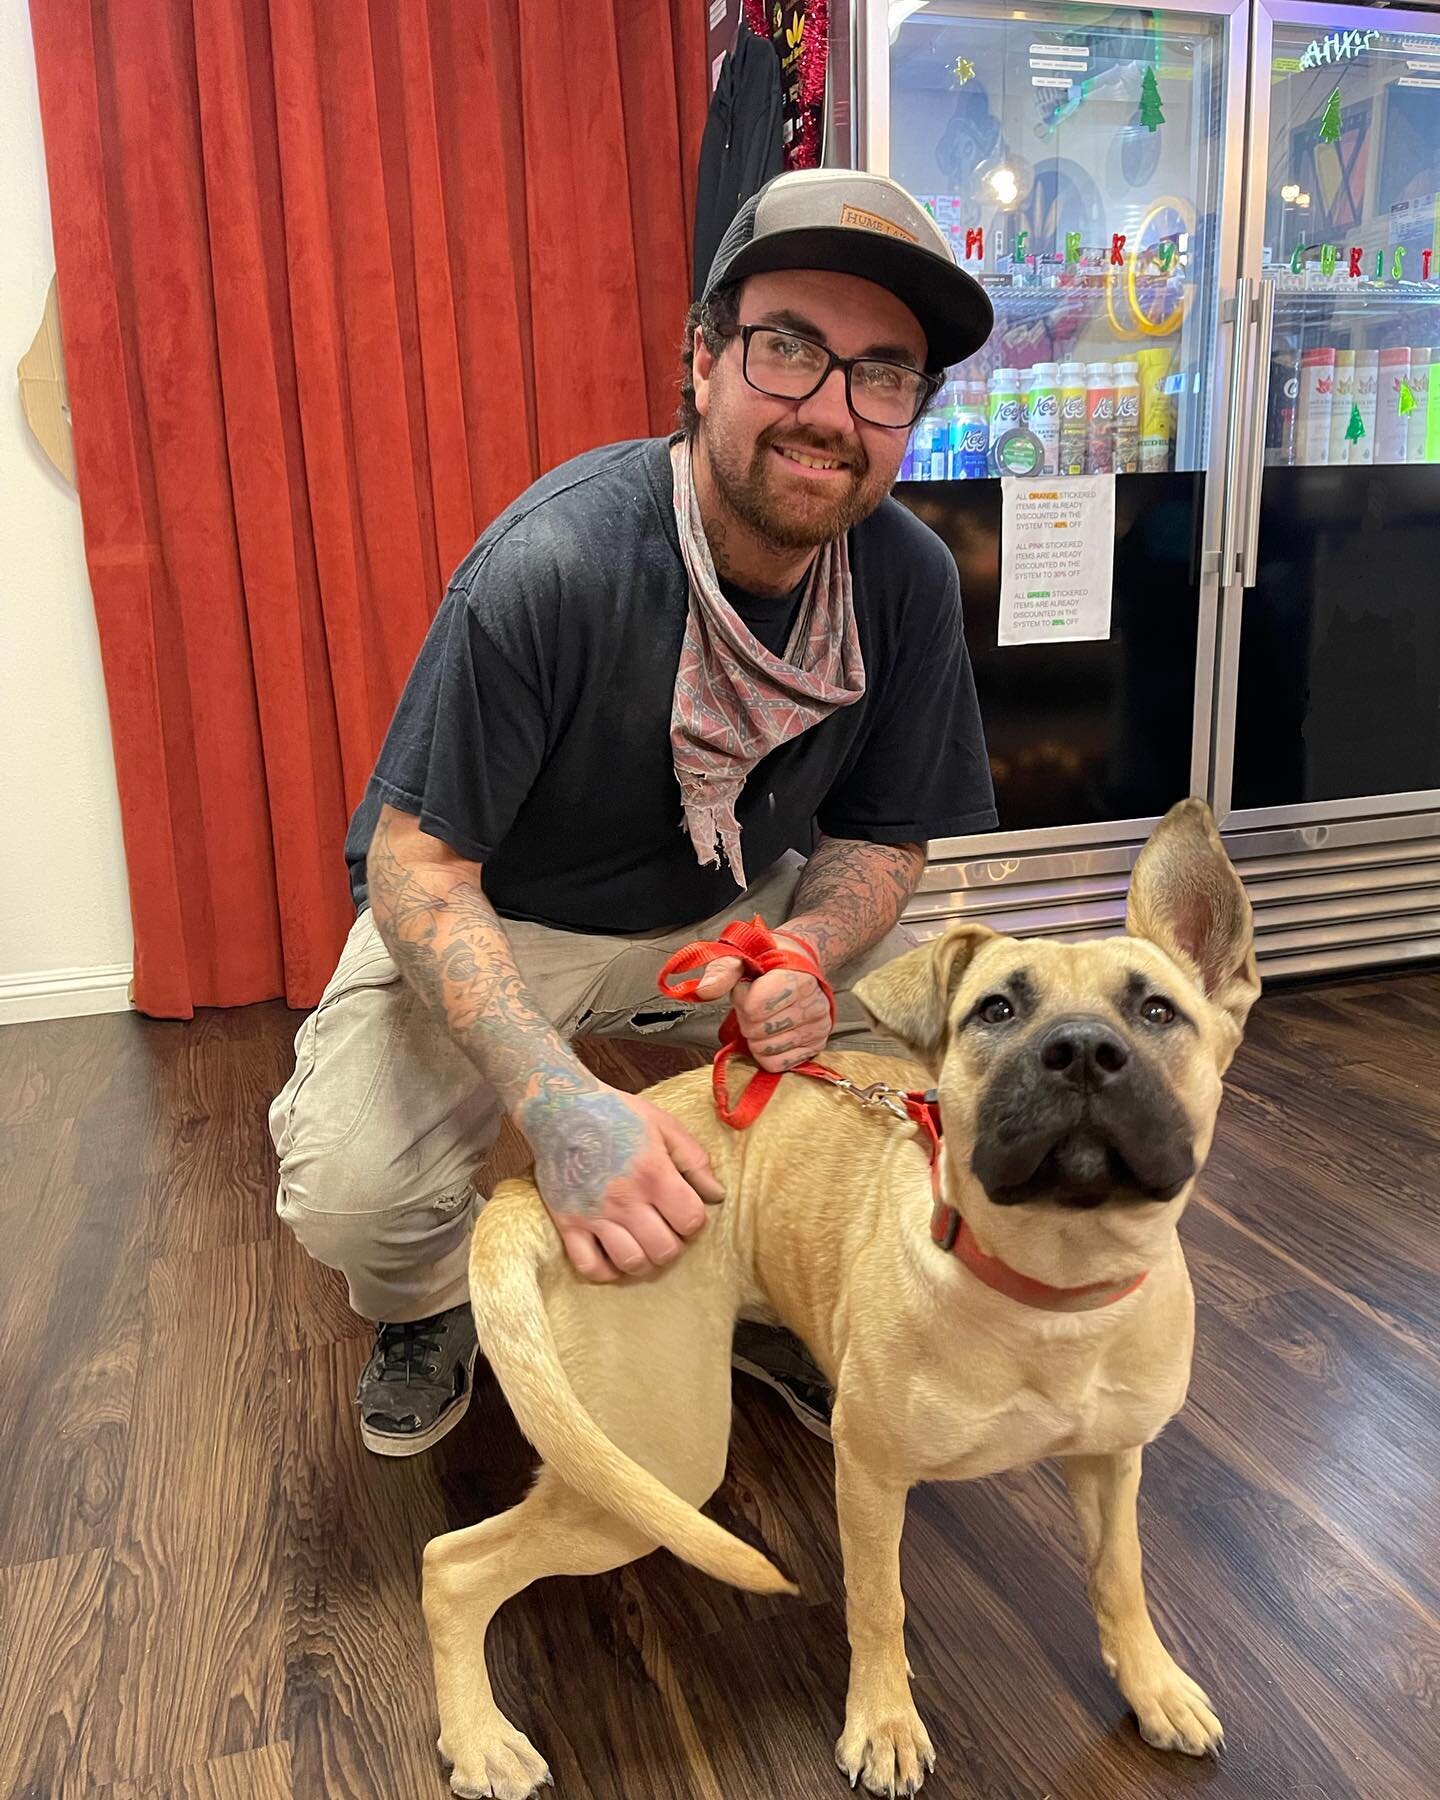 Happy to see our customer with his best friend! 🐕 Dogs are always welcome here at #royalhealingemporium #sundayvibes